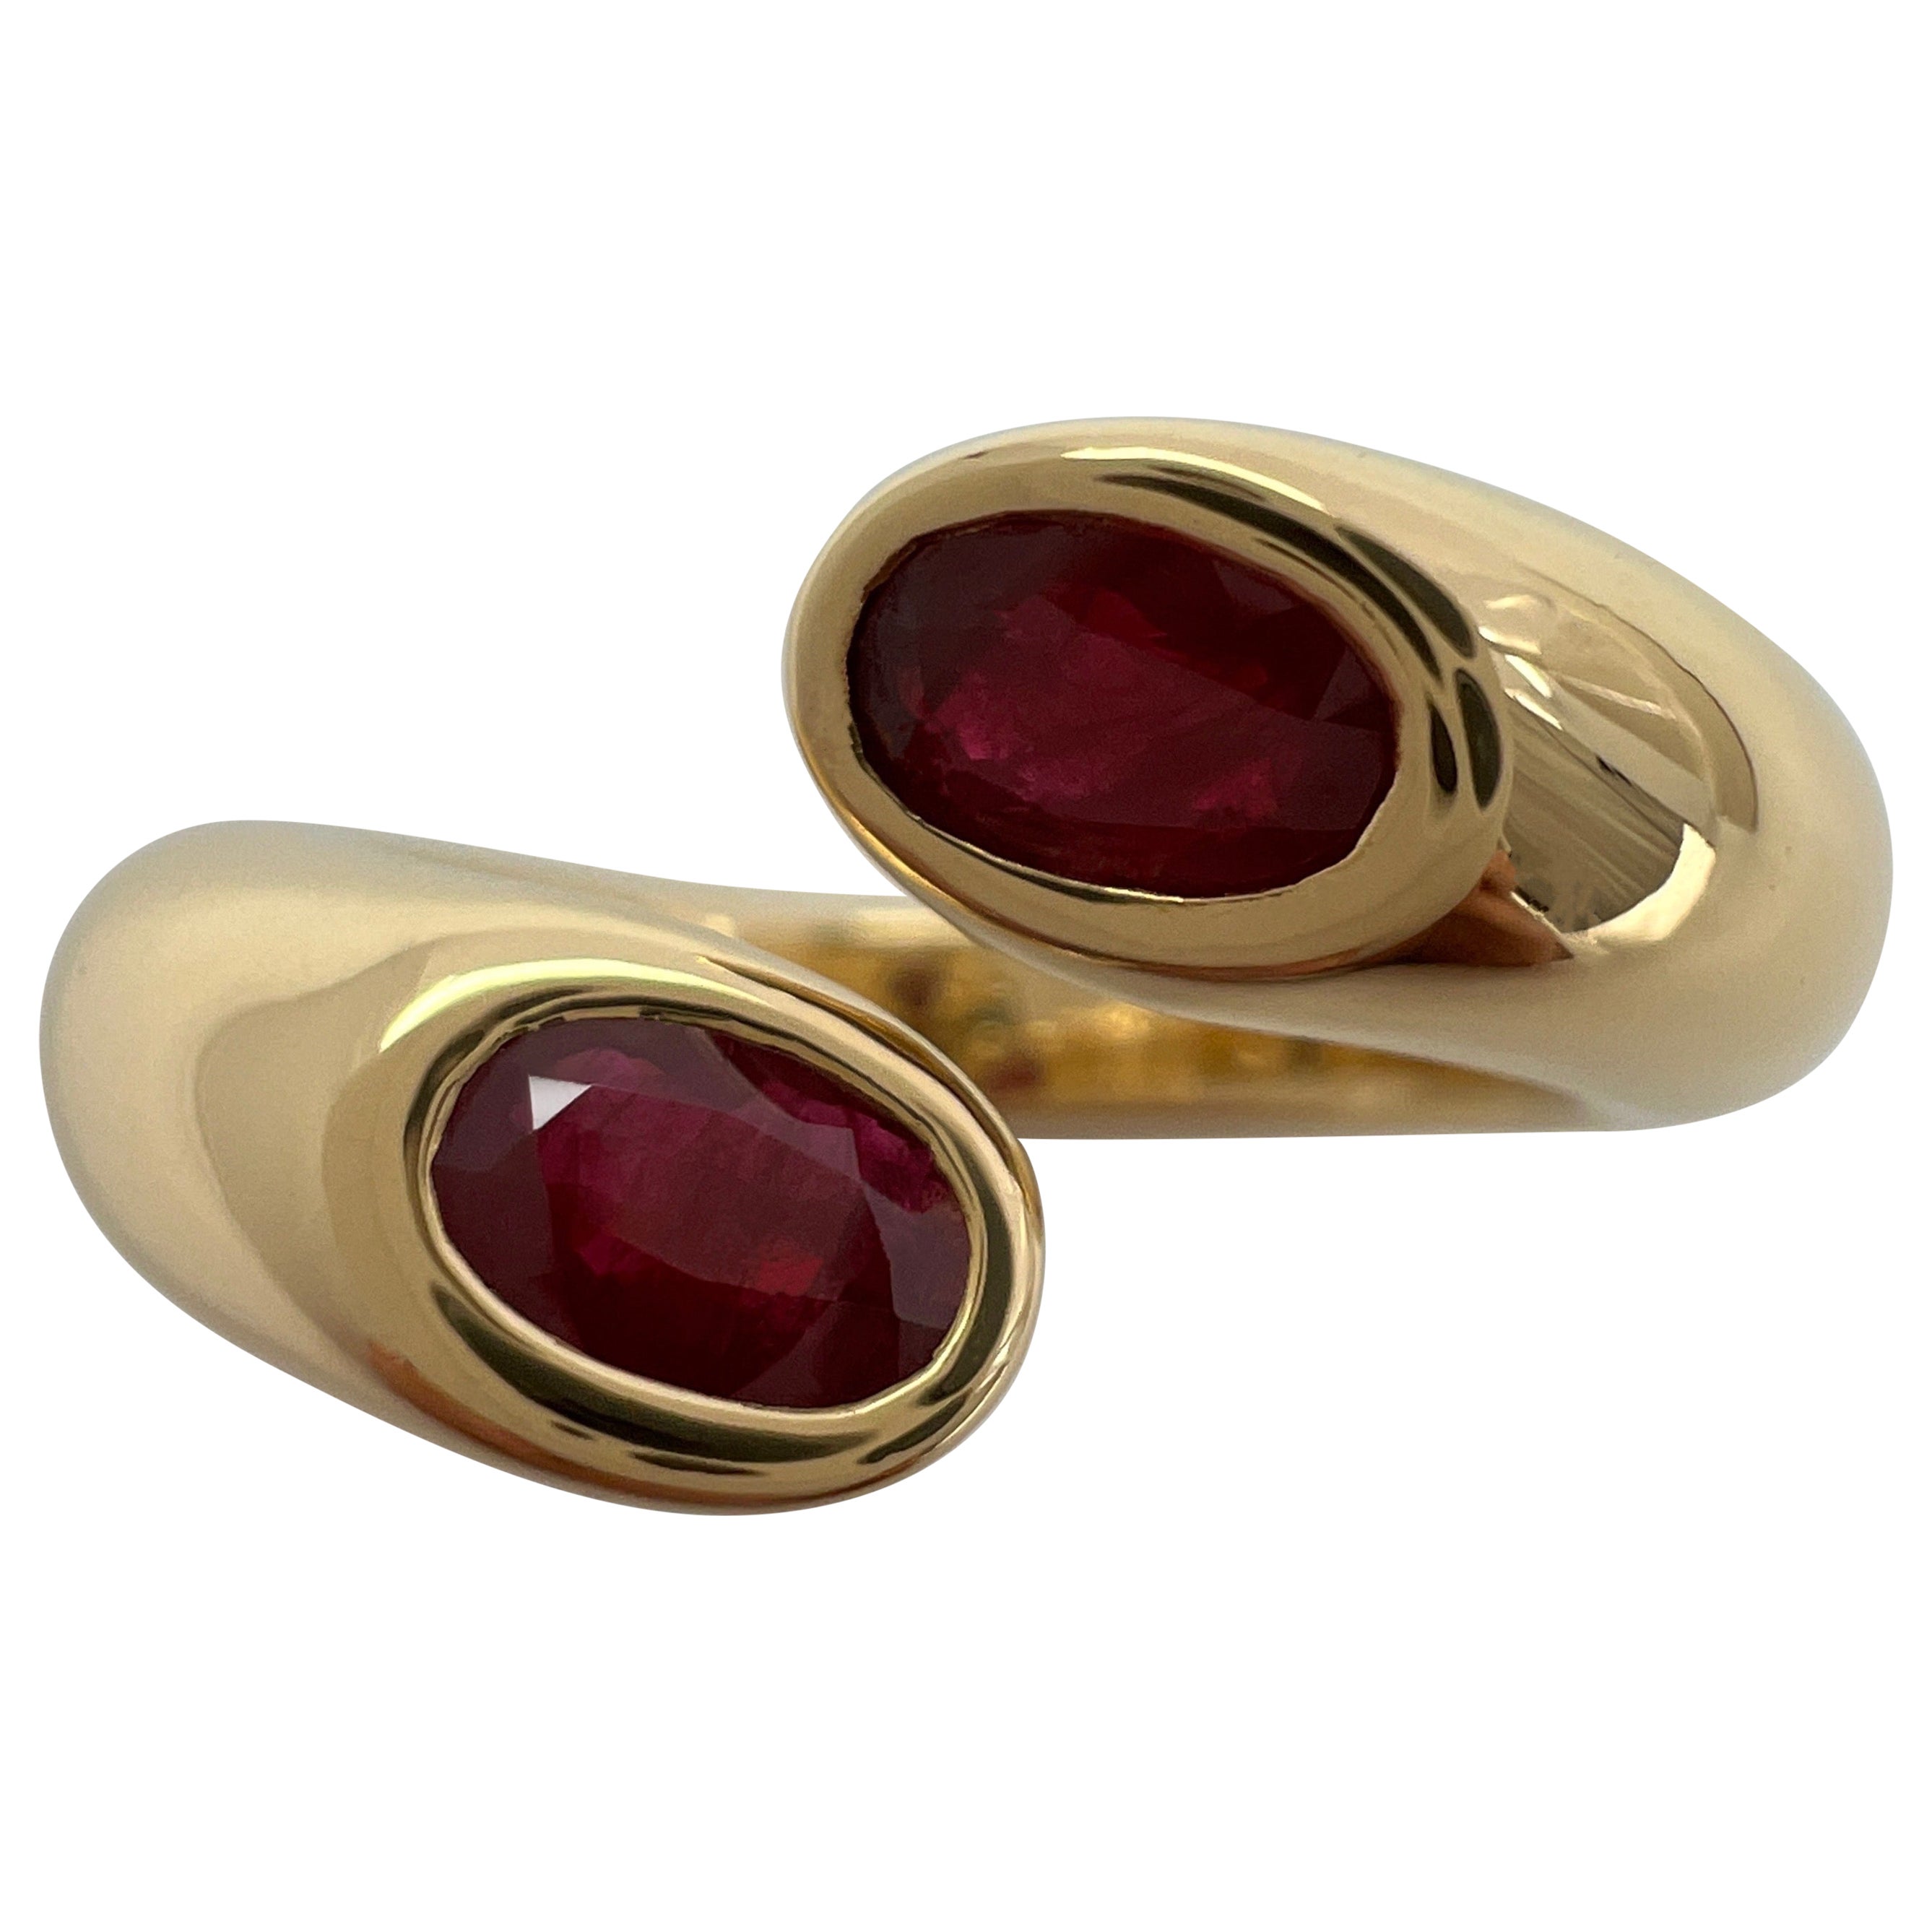 Rare Vintage Cartier Red Ruby Ellipse Oval Cut 18k Gold Bypass Split Ring 6.5 52